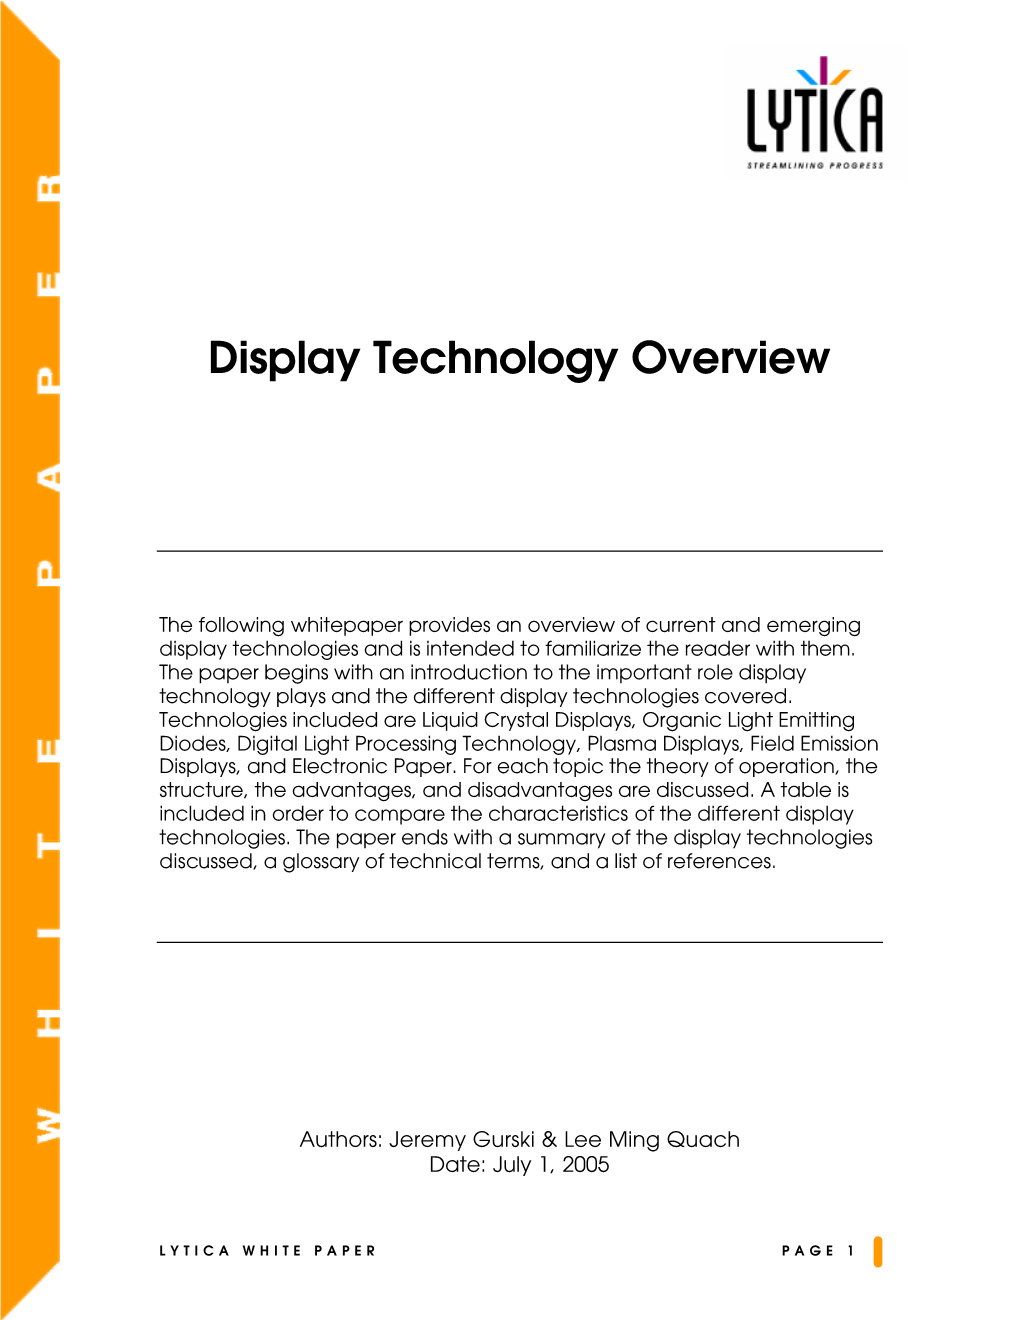 Display Technology Overview